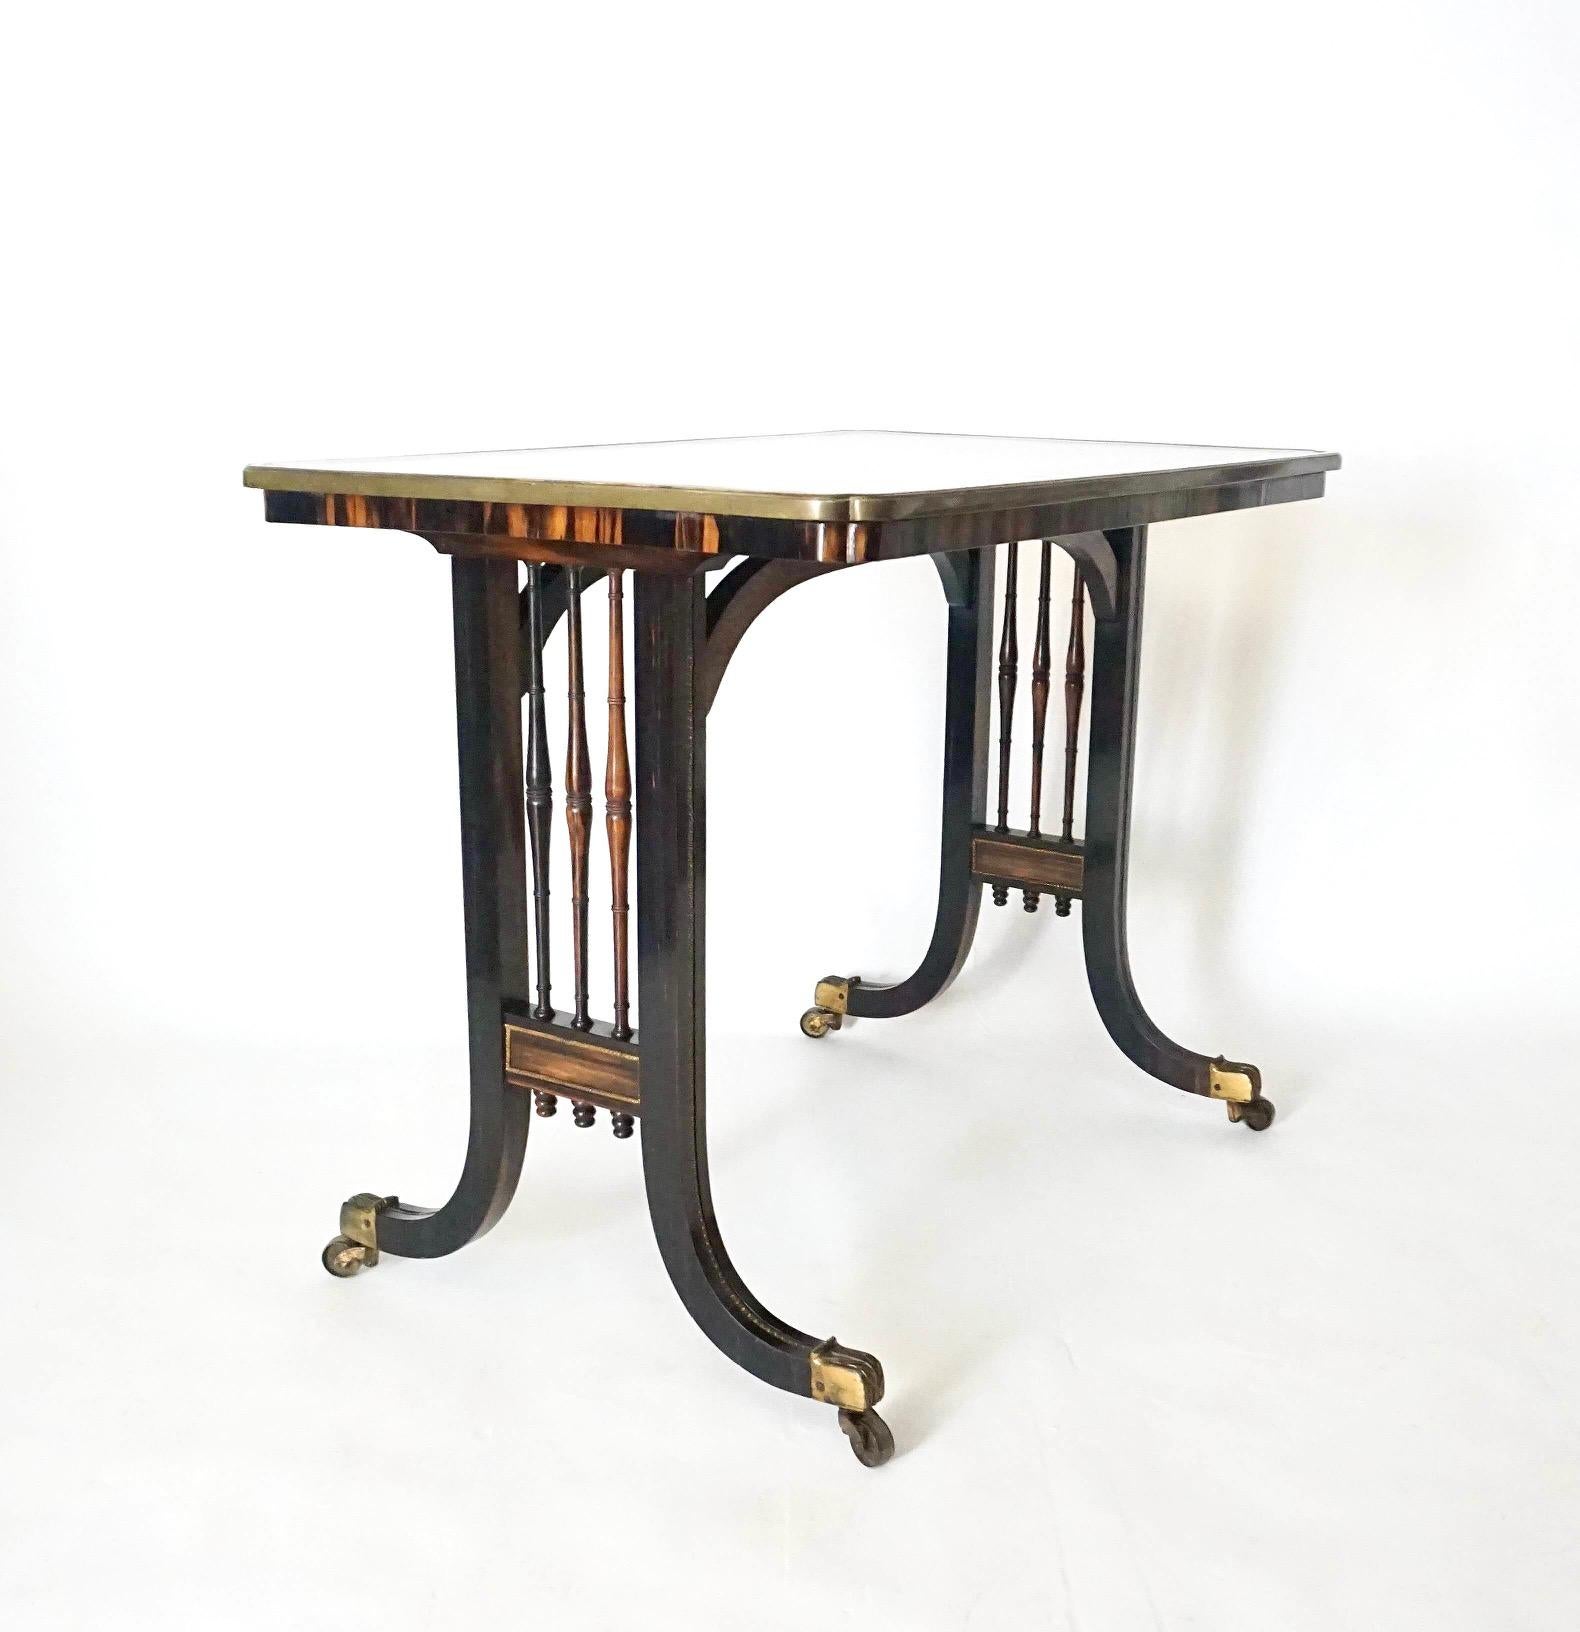 An exceptional circa 1820 English regency period rectangular-form writing or occasional table attributed to Gillows having brass bound cusped-corner top with ebony line inlay and satinwood feather-banding surrounding center field of bookmatched